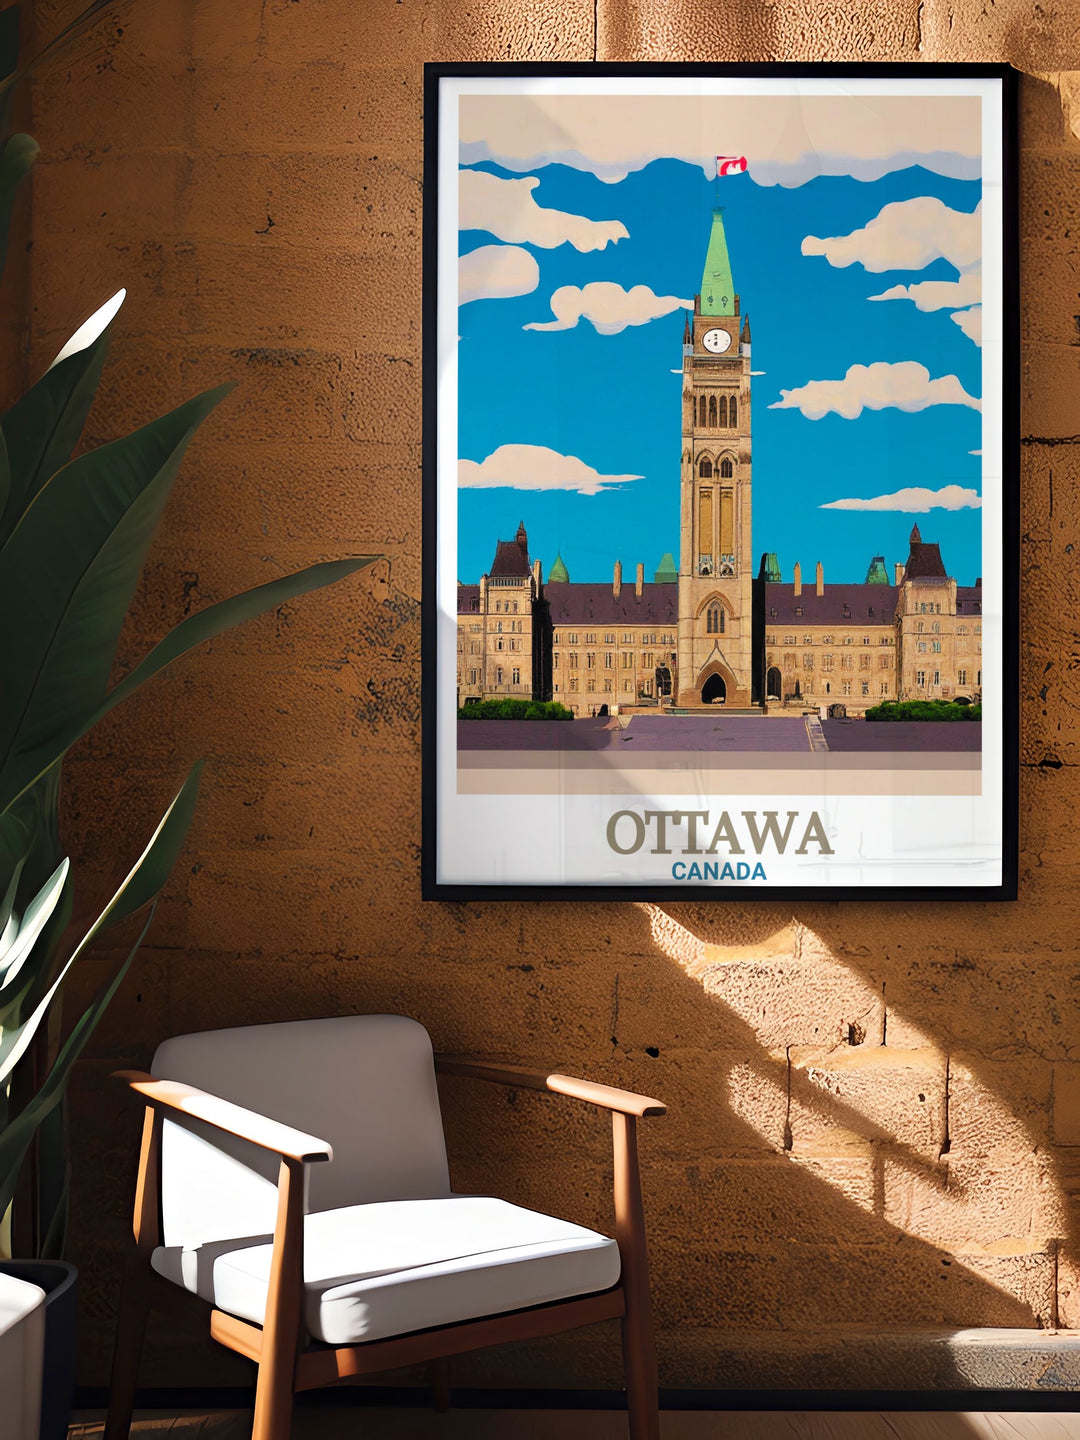 Ottawa Photo print featuring Parliament Hill and the citys skyline. This travel poster is perfect for those who appreciate photography and the beauty of Ottawas iconic landmarks providing a captivating view of Parliament Hill.